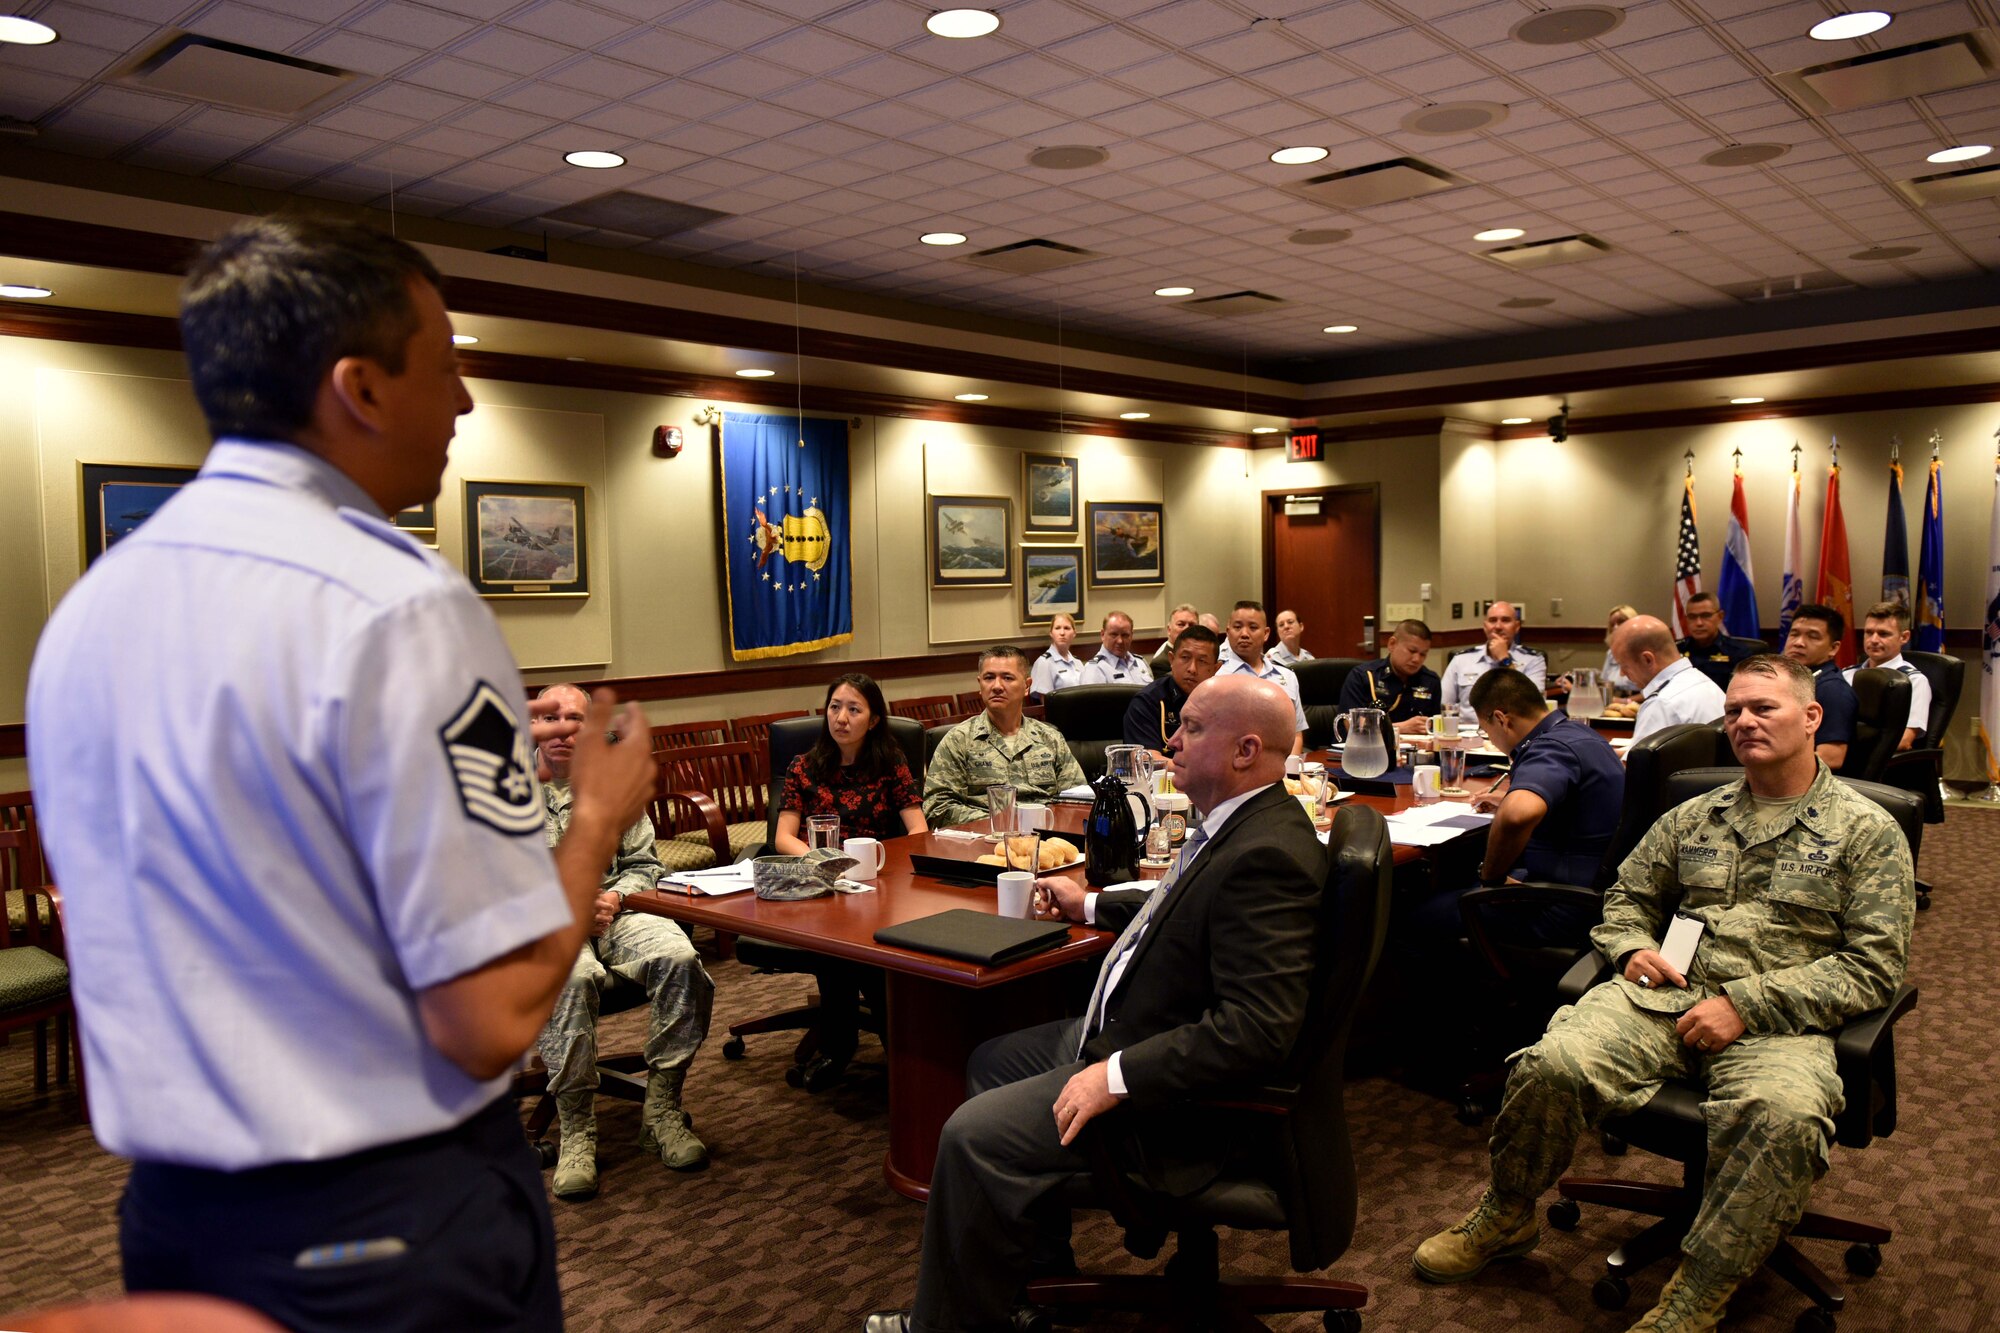 U.S. Air Force Master Sgt. Douglas Earl, 17th Training Group superintendent of standards and evaluations, presents a wing mission brief to Royal Thai air force, Pacific Air Forces and 17th Training Wing leadership in the Norma Brown building during a tour on Goodfellow Air Force Base, Texas, Aug. 2, 2018. The 17th TRW’s mission is to train, develop and inspire exceptional intelligence, surveillance and reconnaissance and fire protection professionals for America and her allies. (U.S. Air Force photo by Senior Airman Randall Moose/Released)